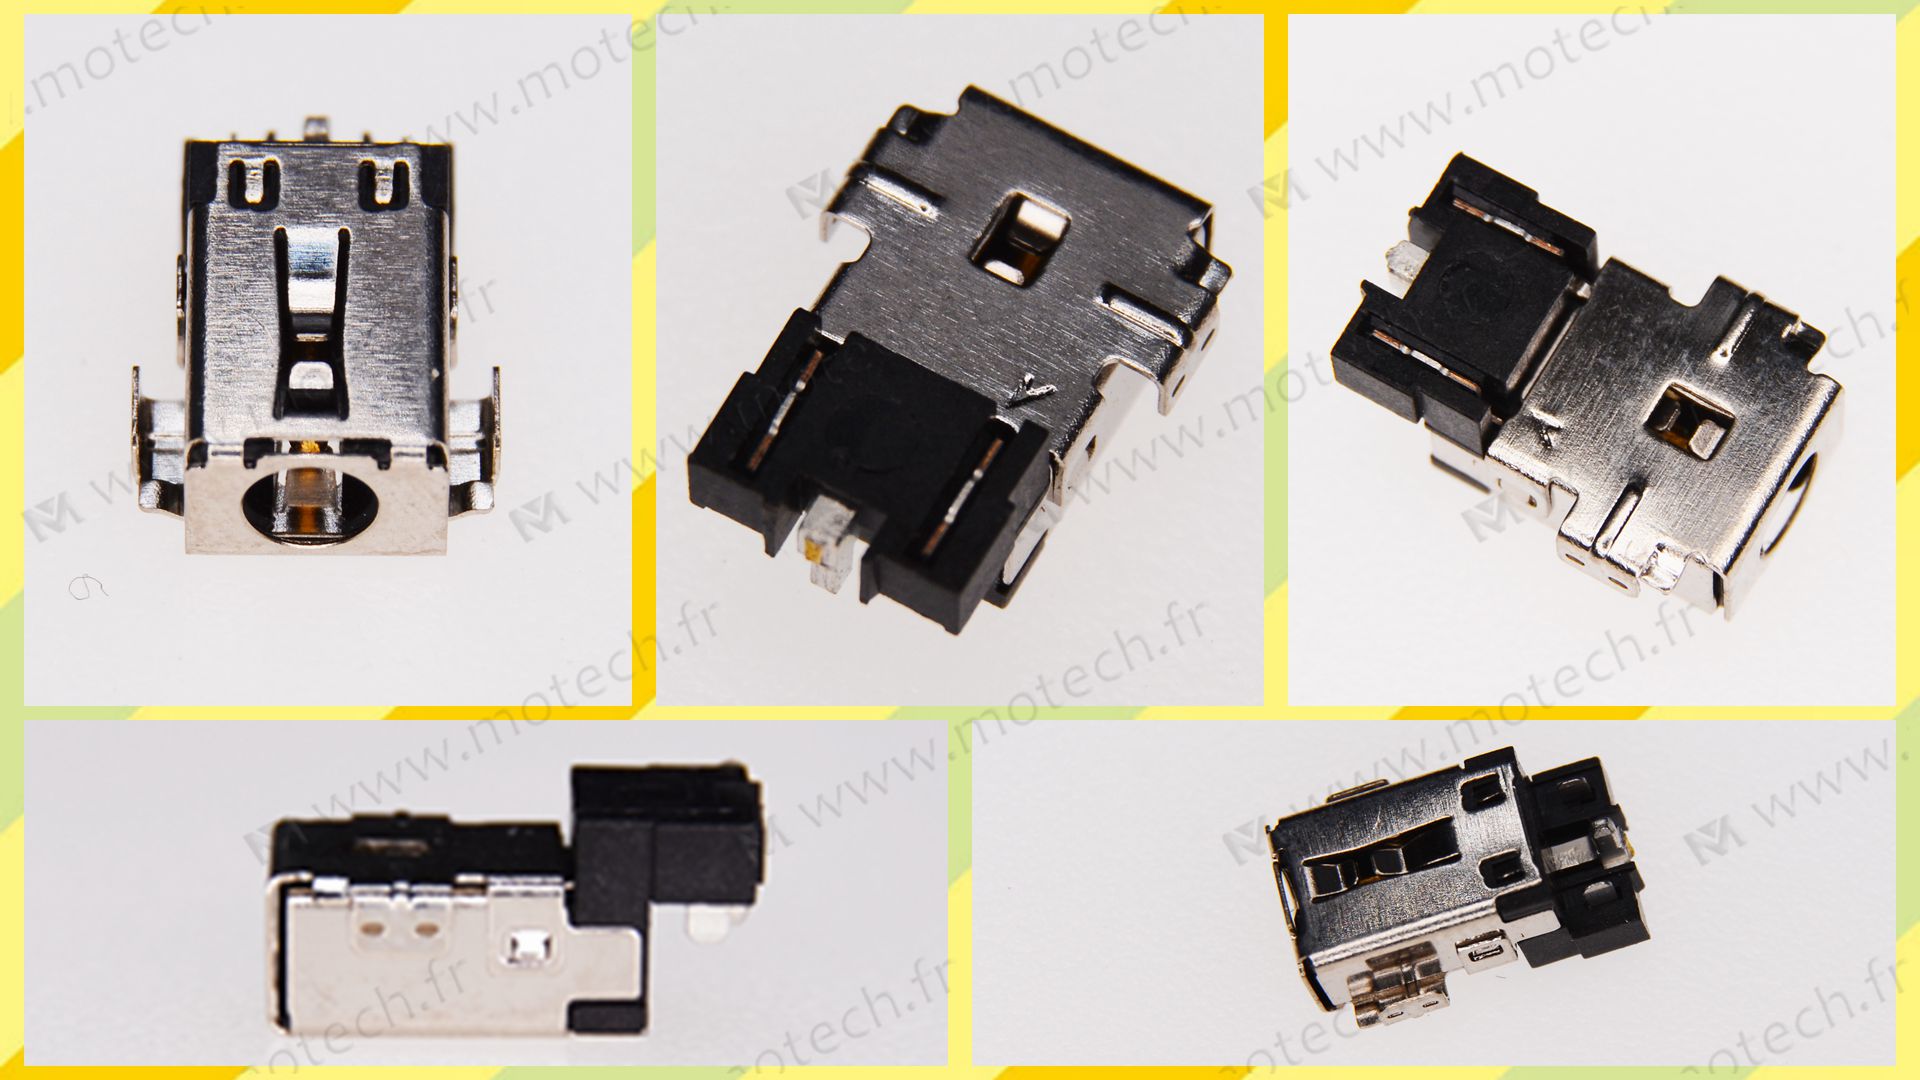 Acer SF314-57G charging connector, Acer SF314-57G DC Power Jack, Acer SF314-57G Power Jack, Acer SF314-57G plug, Acer SF314-57G Jack socket, Acer SF314-57G connecteur de charge, 